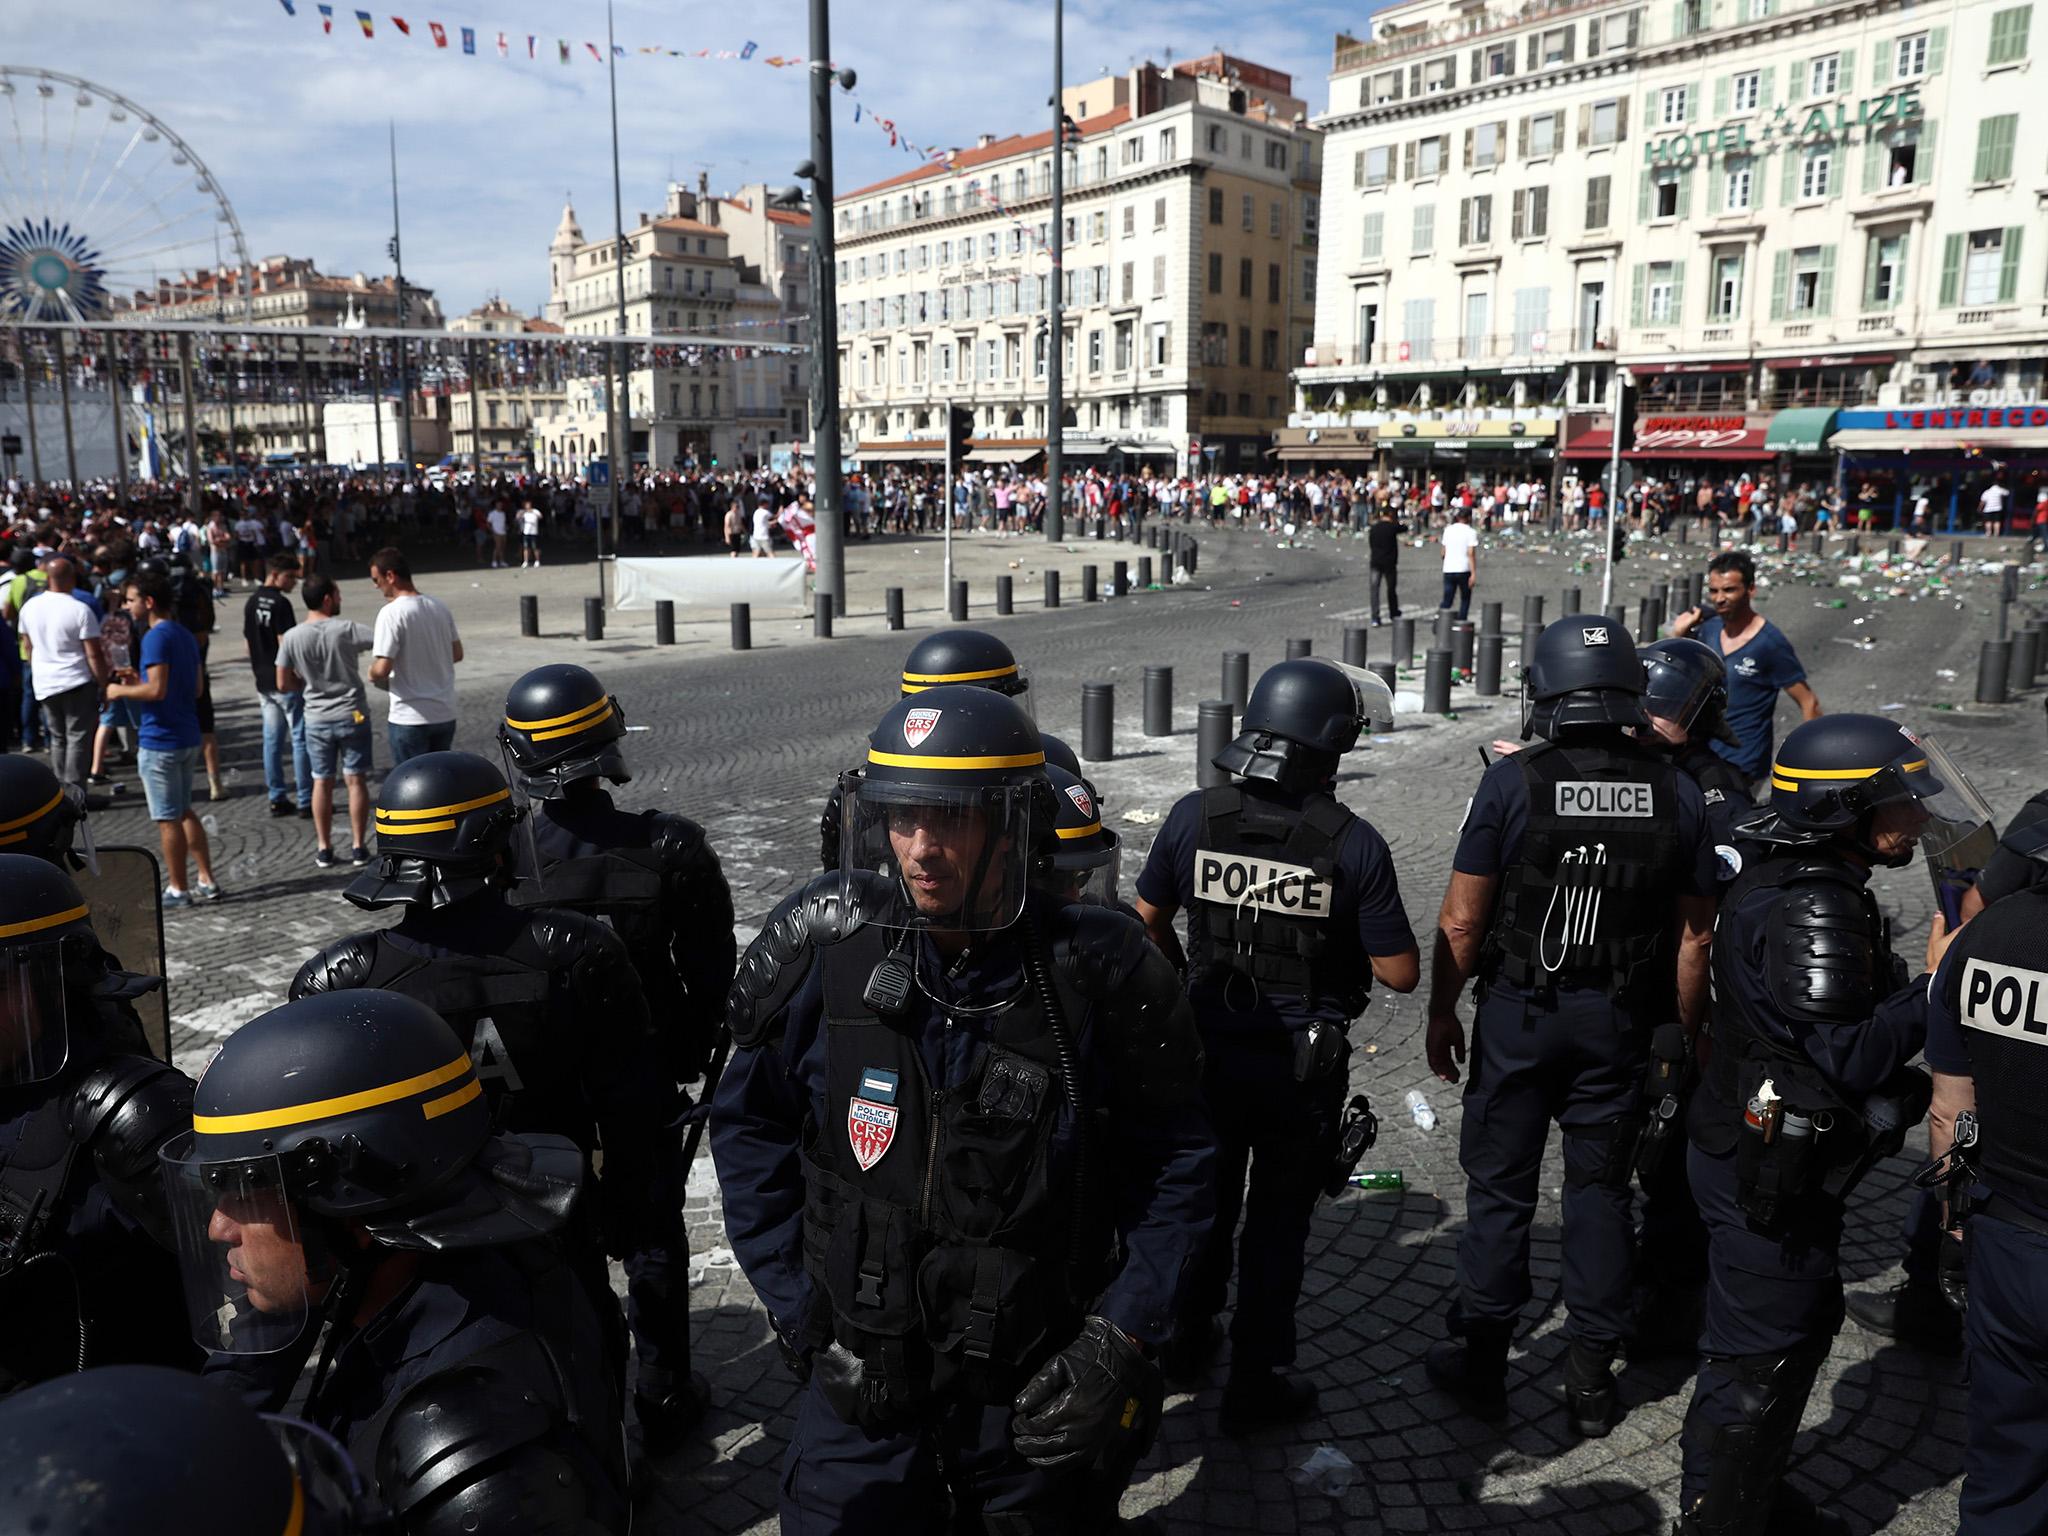 The clashes and violence have marred the start of the Euro 2016 finals in France